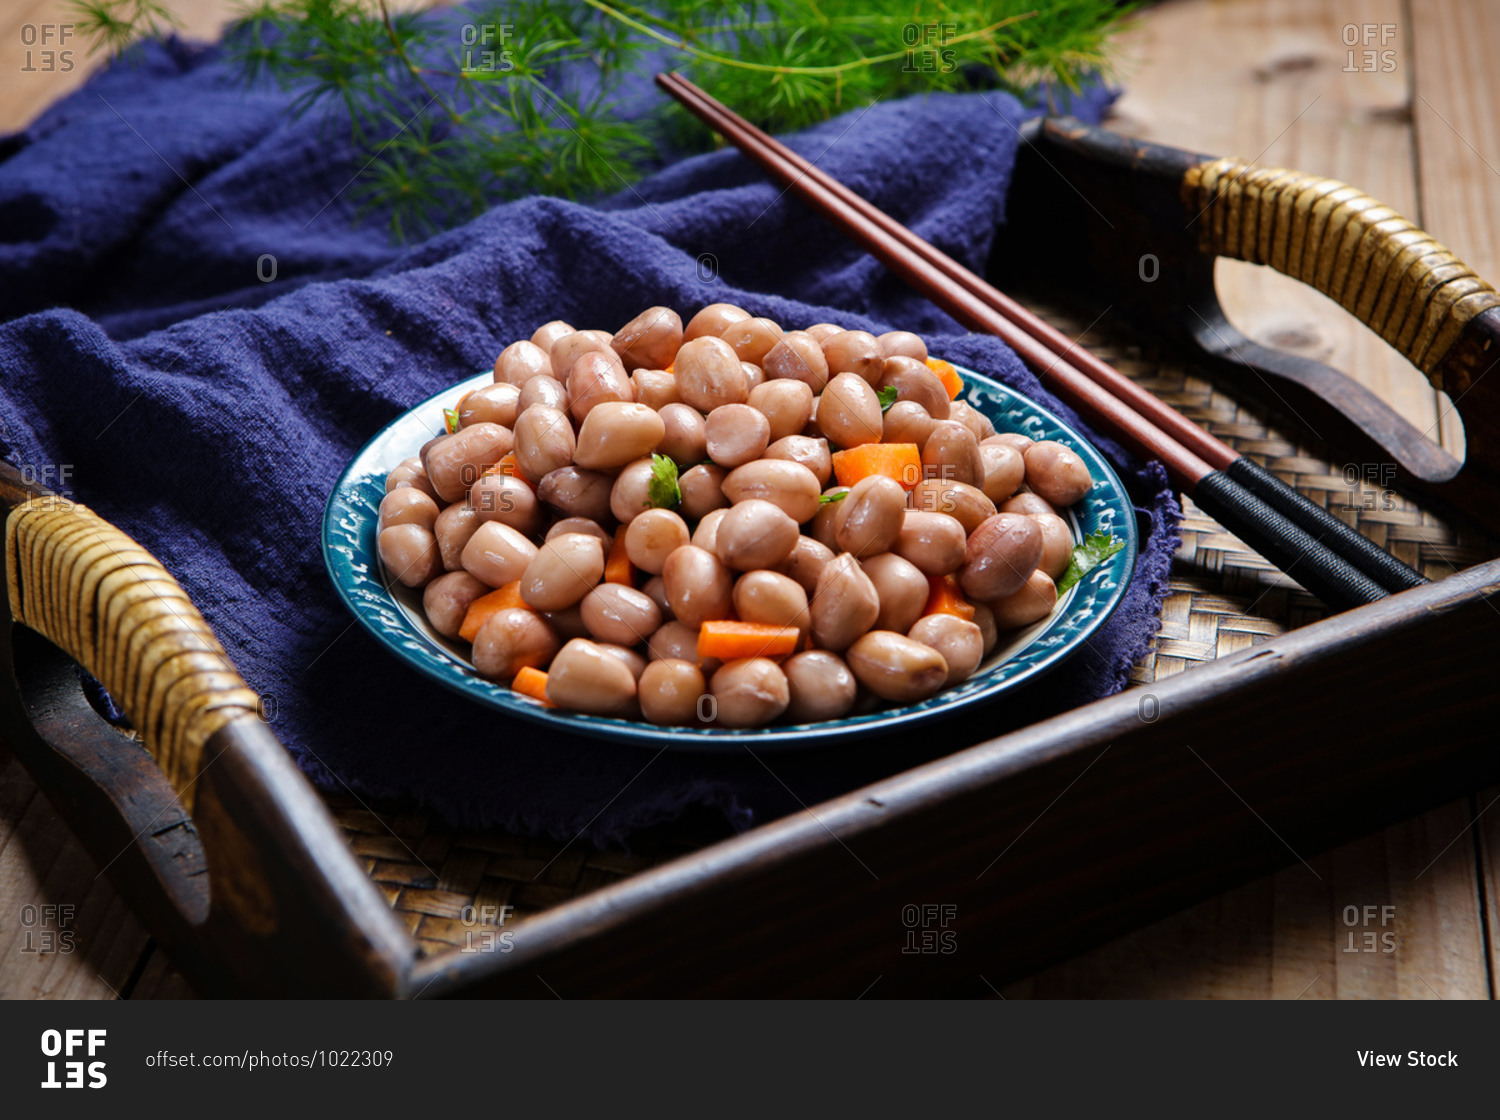 Cold peanuts set out on a table